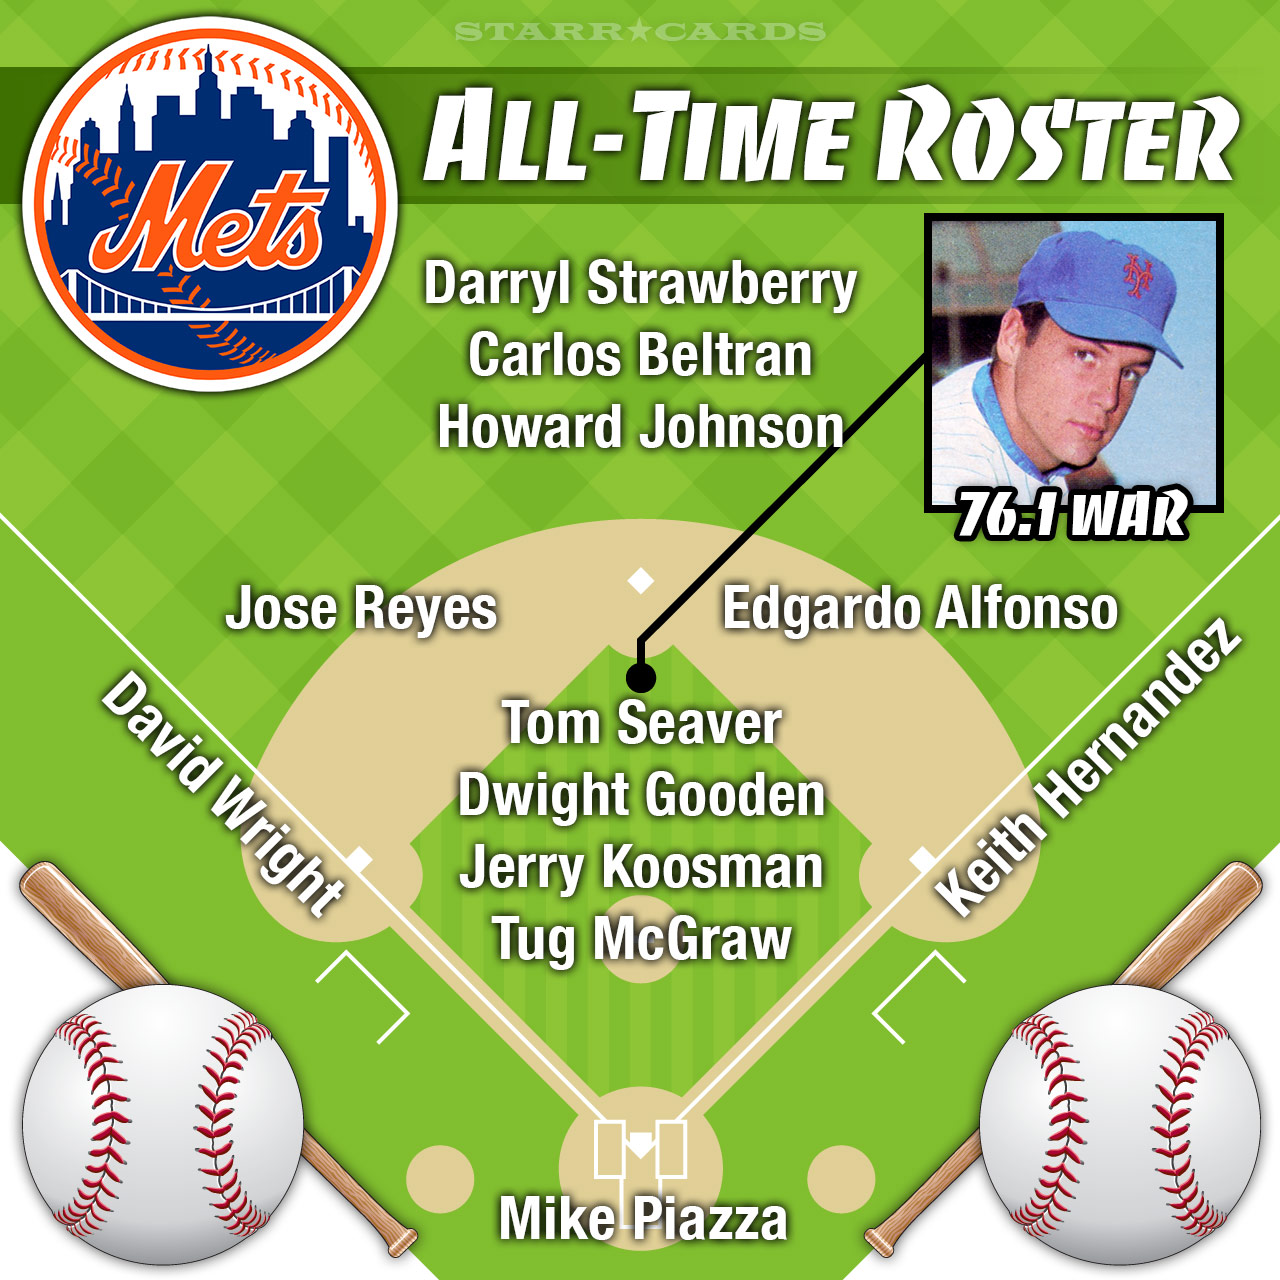 New York Mets Roster